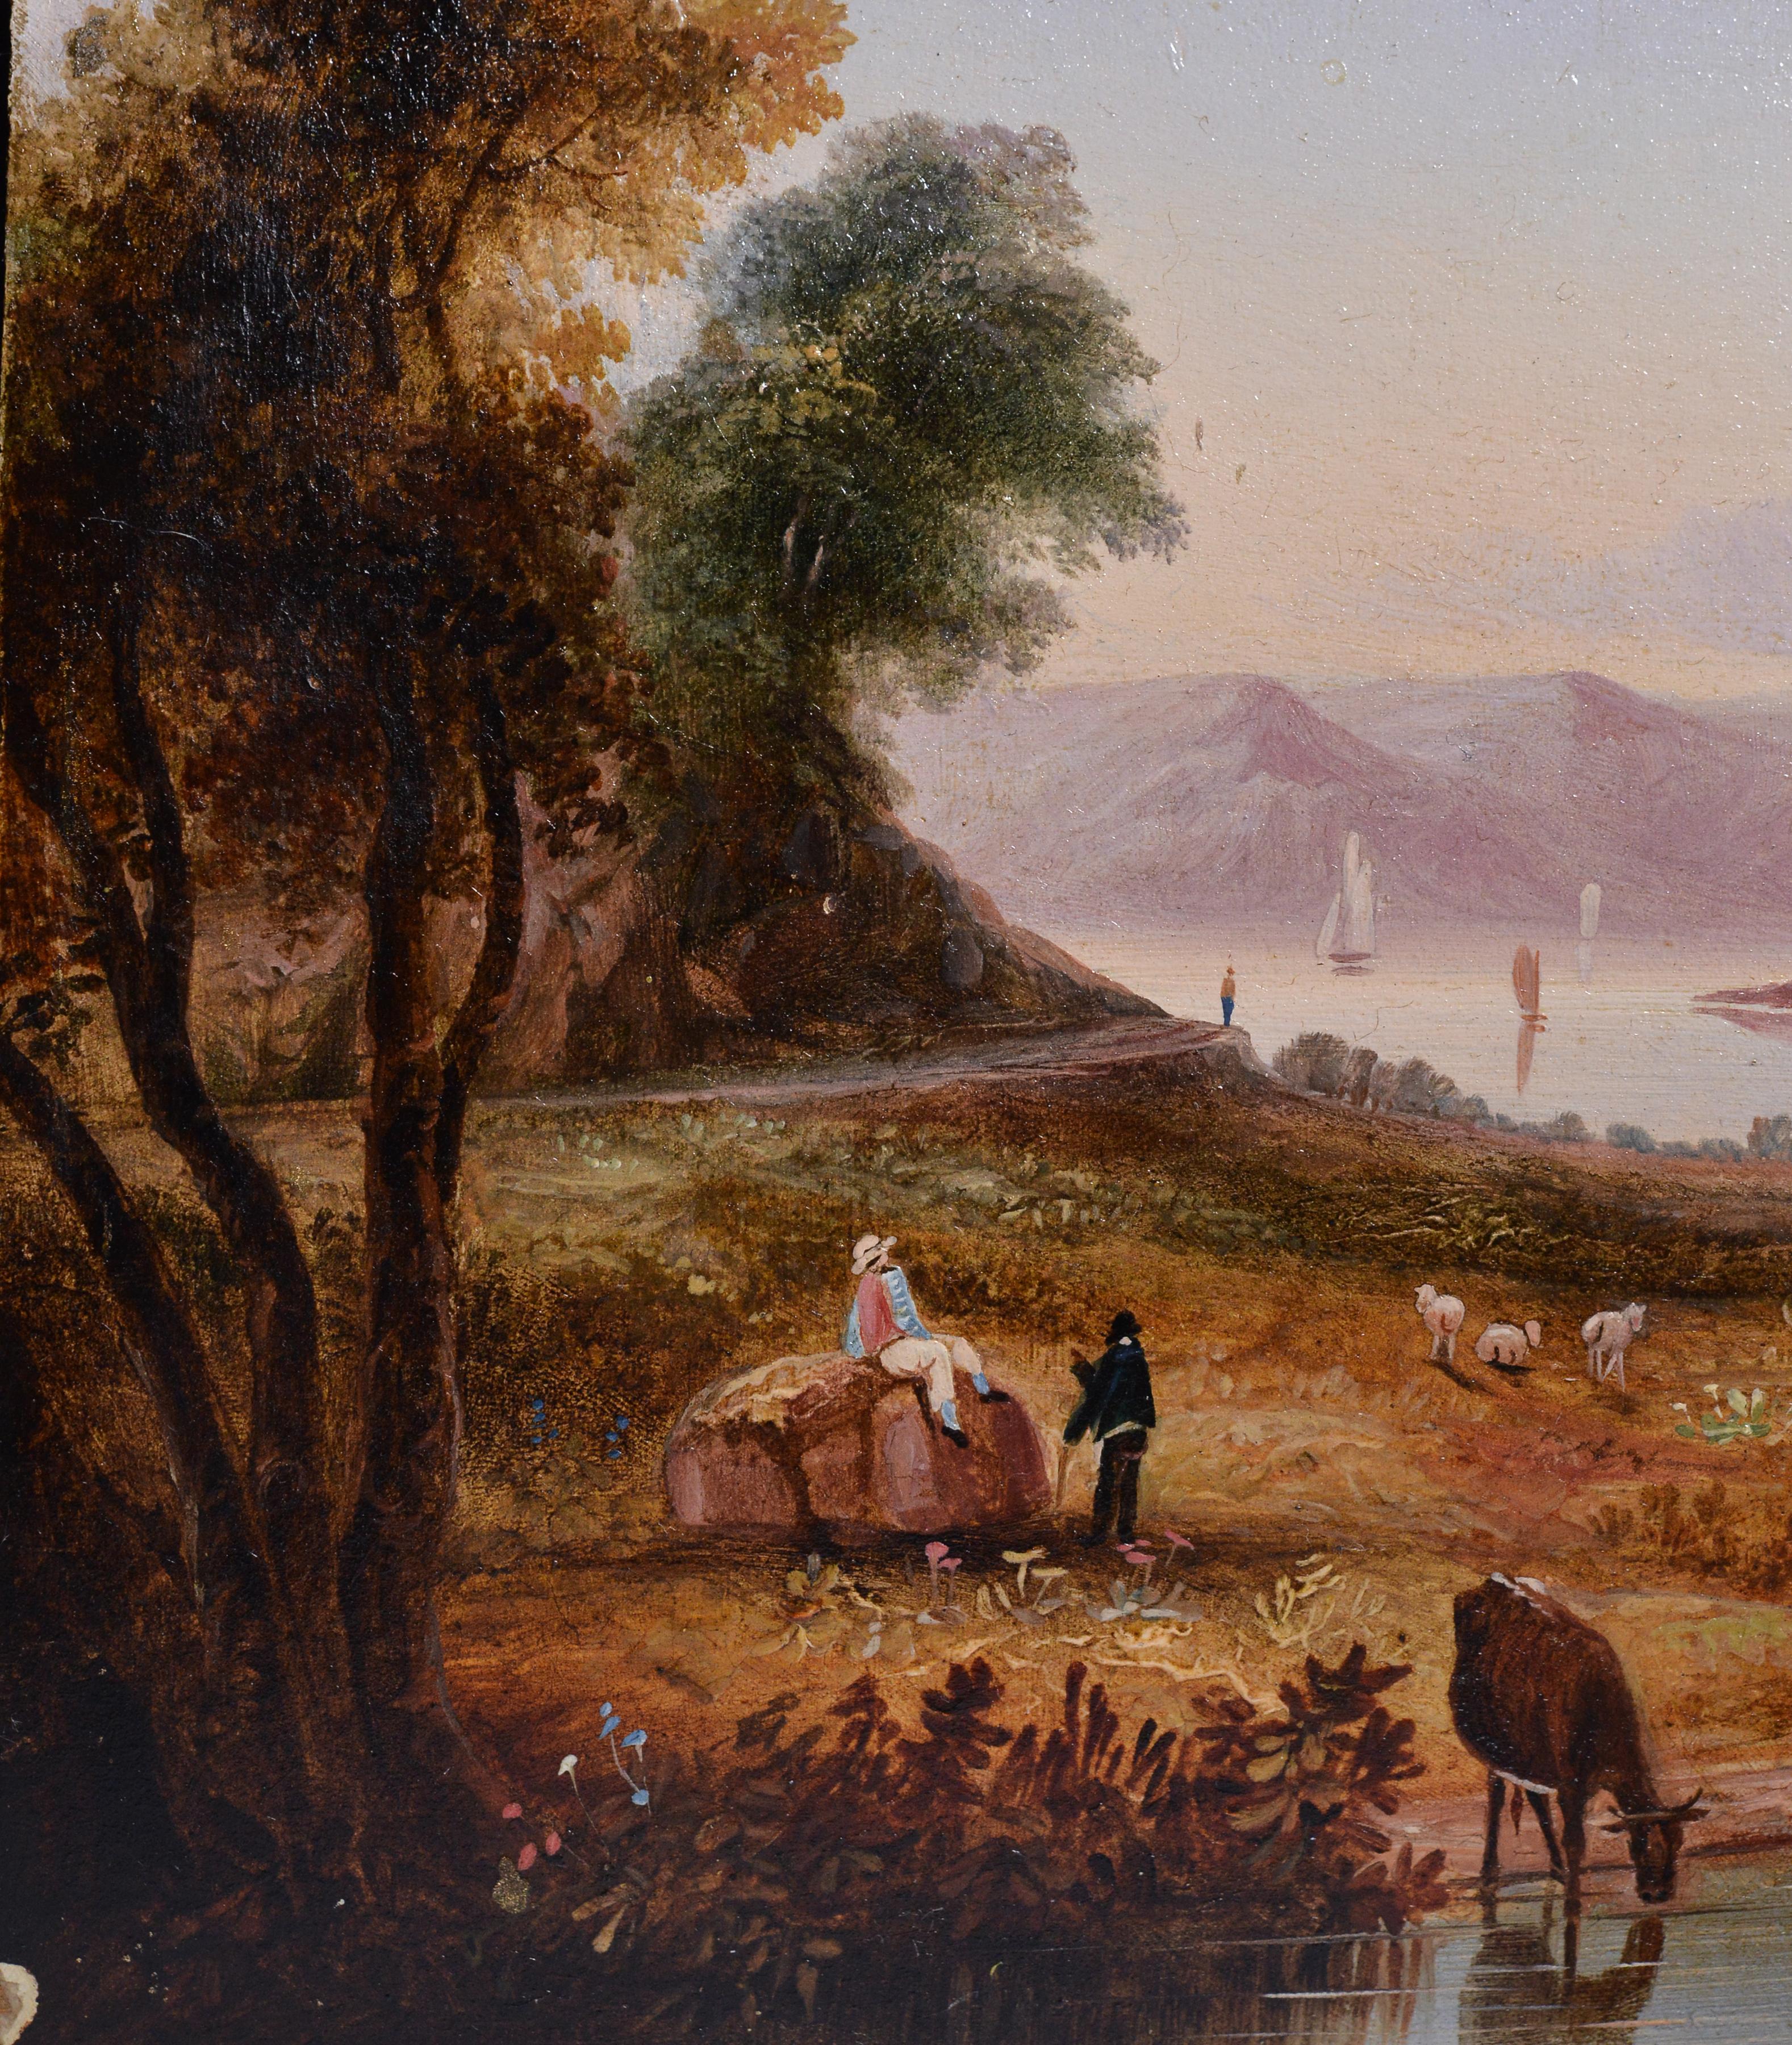 Miniature Pastoral Landscape 19th century Romanticism Oil Painting on Wood - Brown Landscape Painting by Unknown